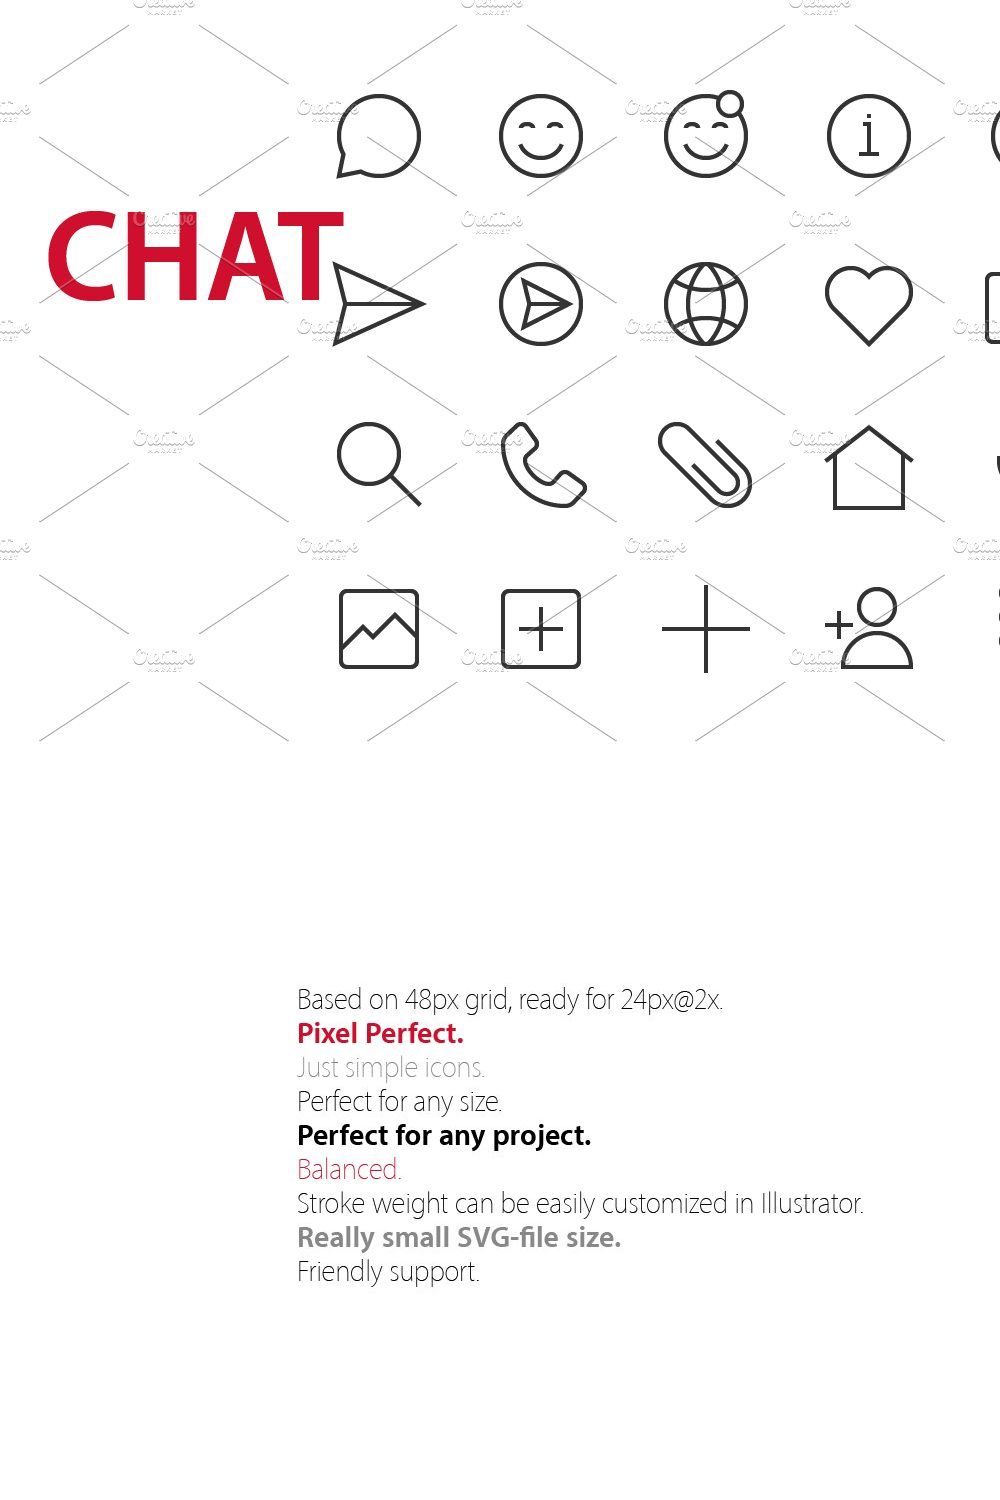 20 Chat UI icons pinterest preview image.